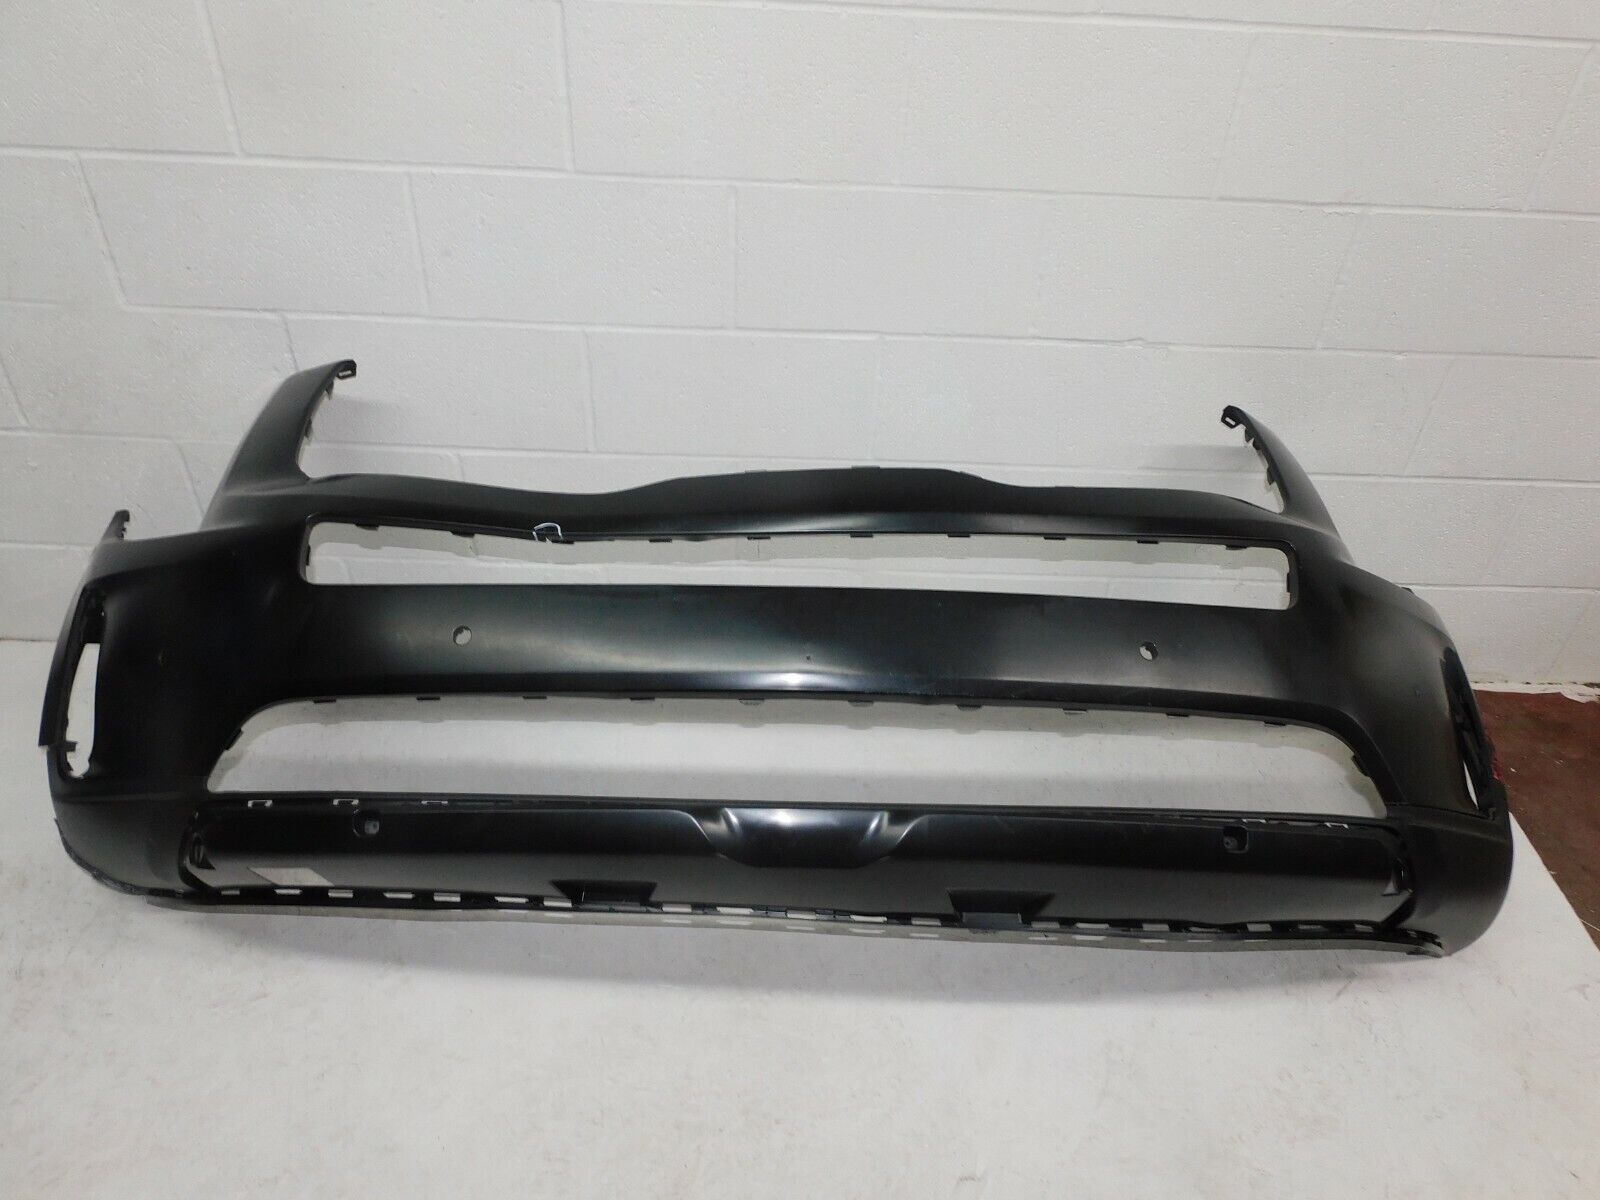 Used 2020 2022 Kia Telluride Front Bumper Cover Oem With Sensor Holes For Sale 86511 S9000 1234